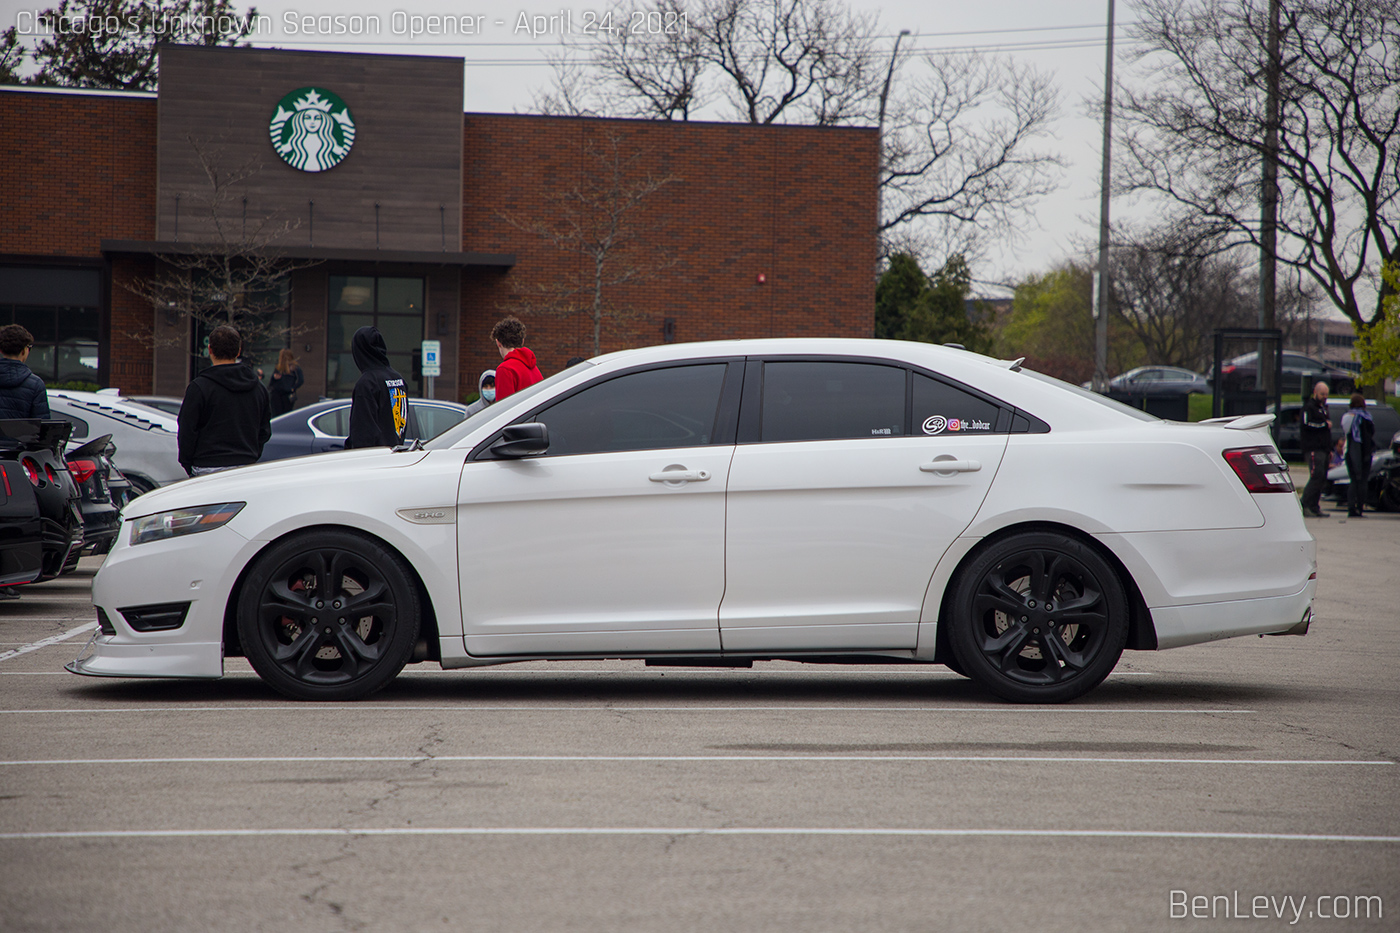 White Ford Taurus SHO with front splitter